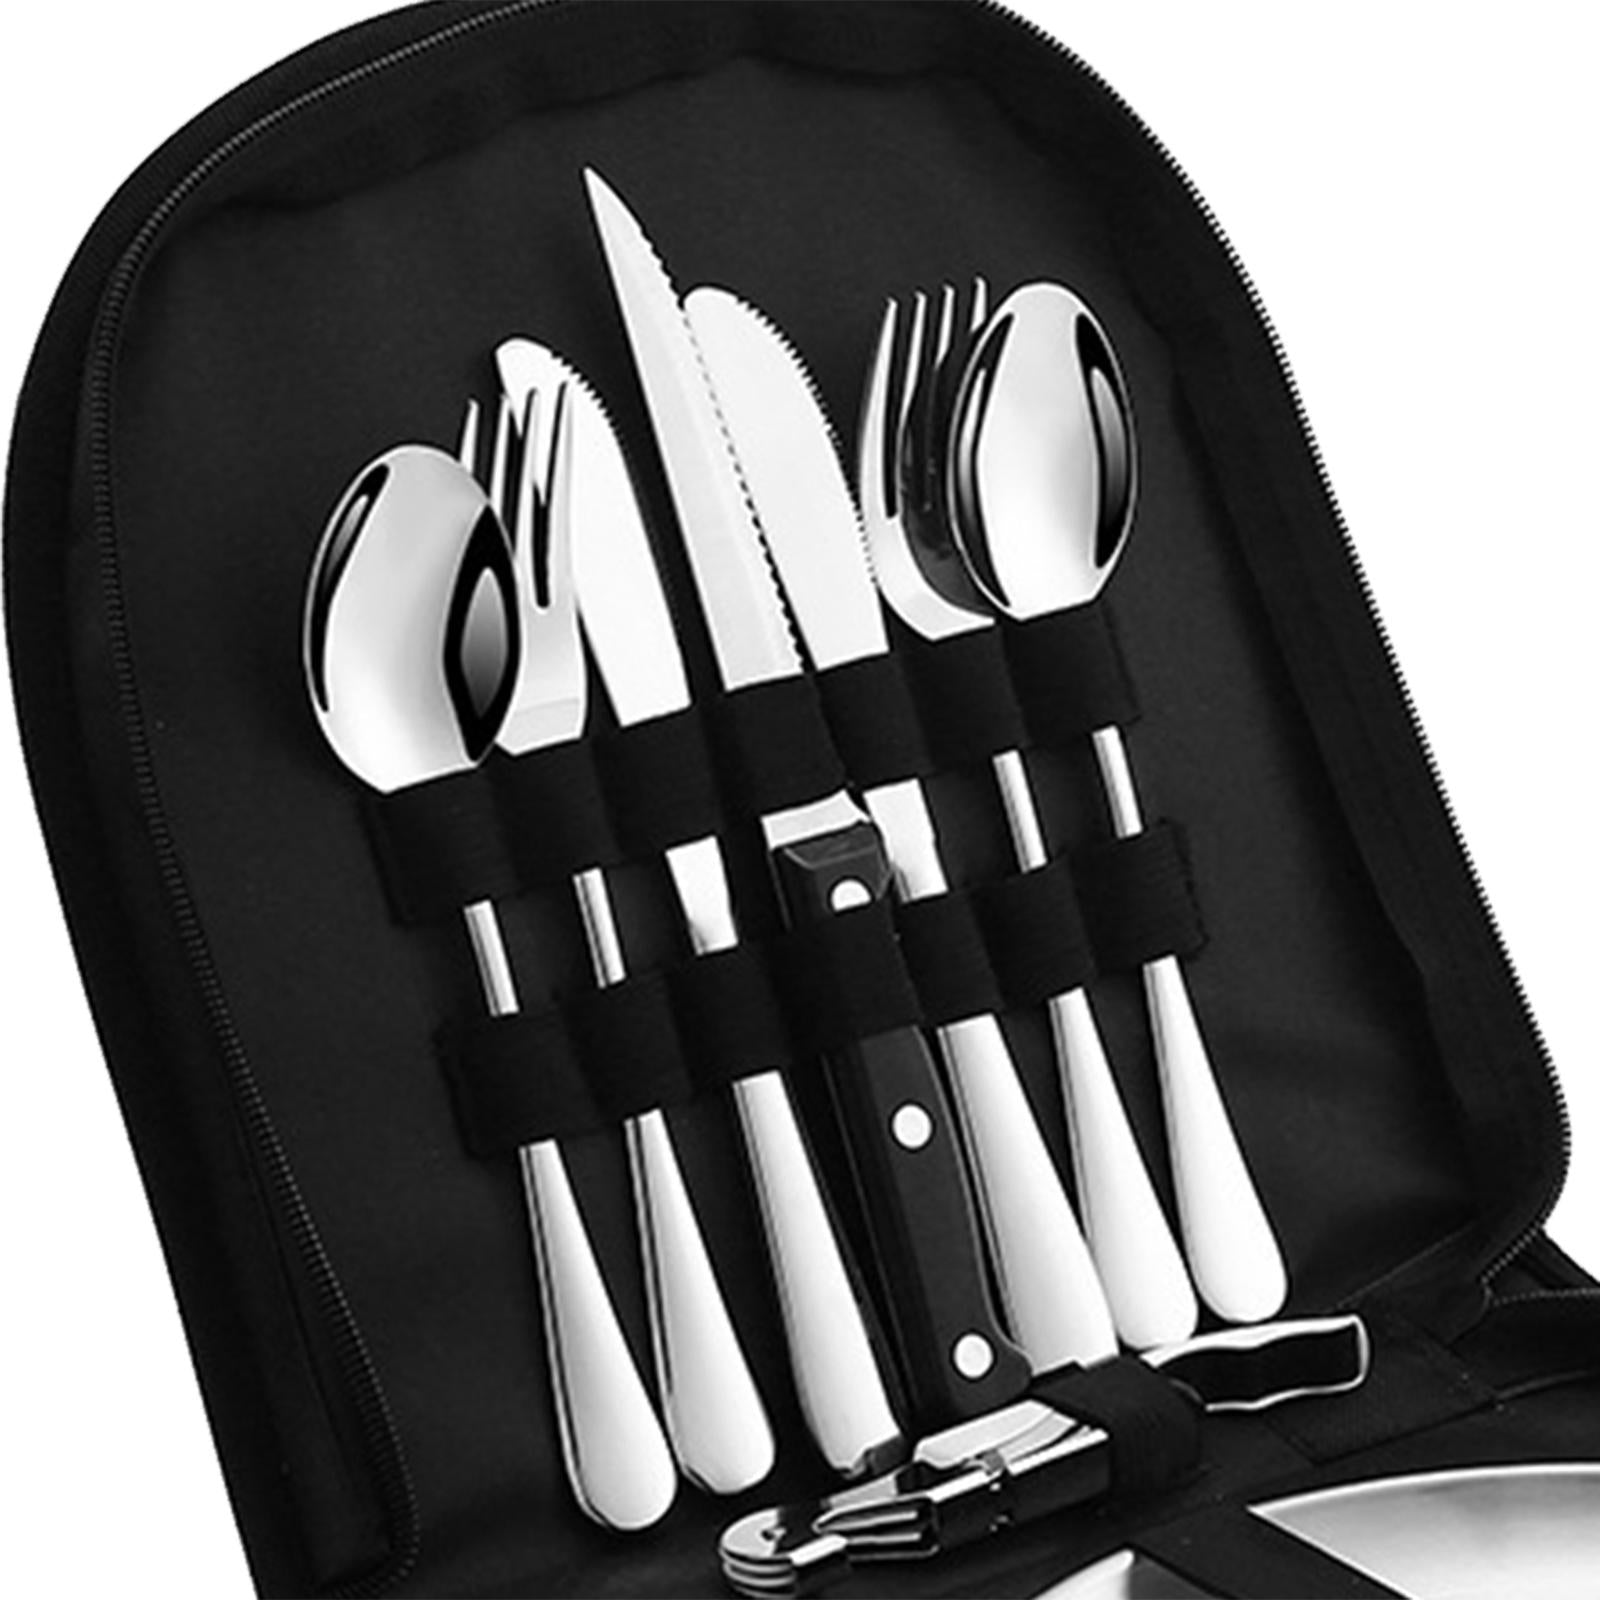 10 Pieces Picnic Family Cutlery Set with Travel Case for Barbecue Hiking Black